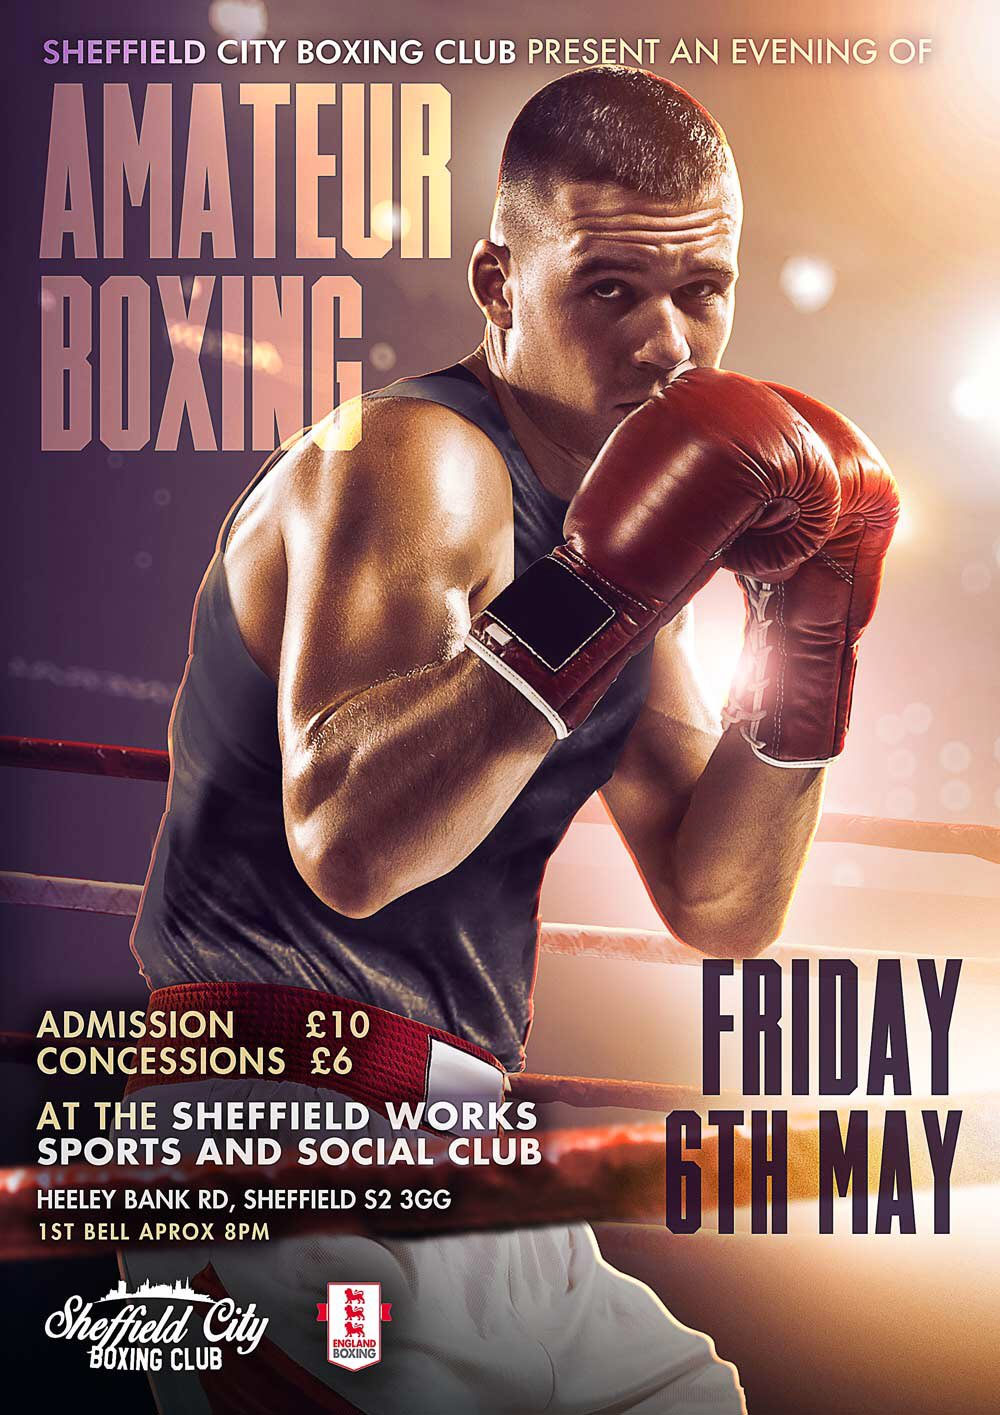 amateur boxing poster for sheffield boxing club